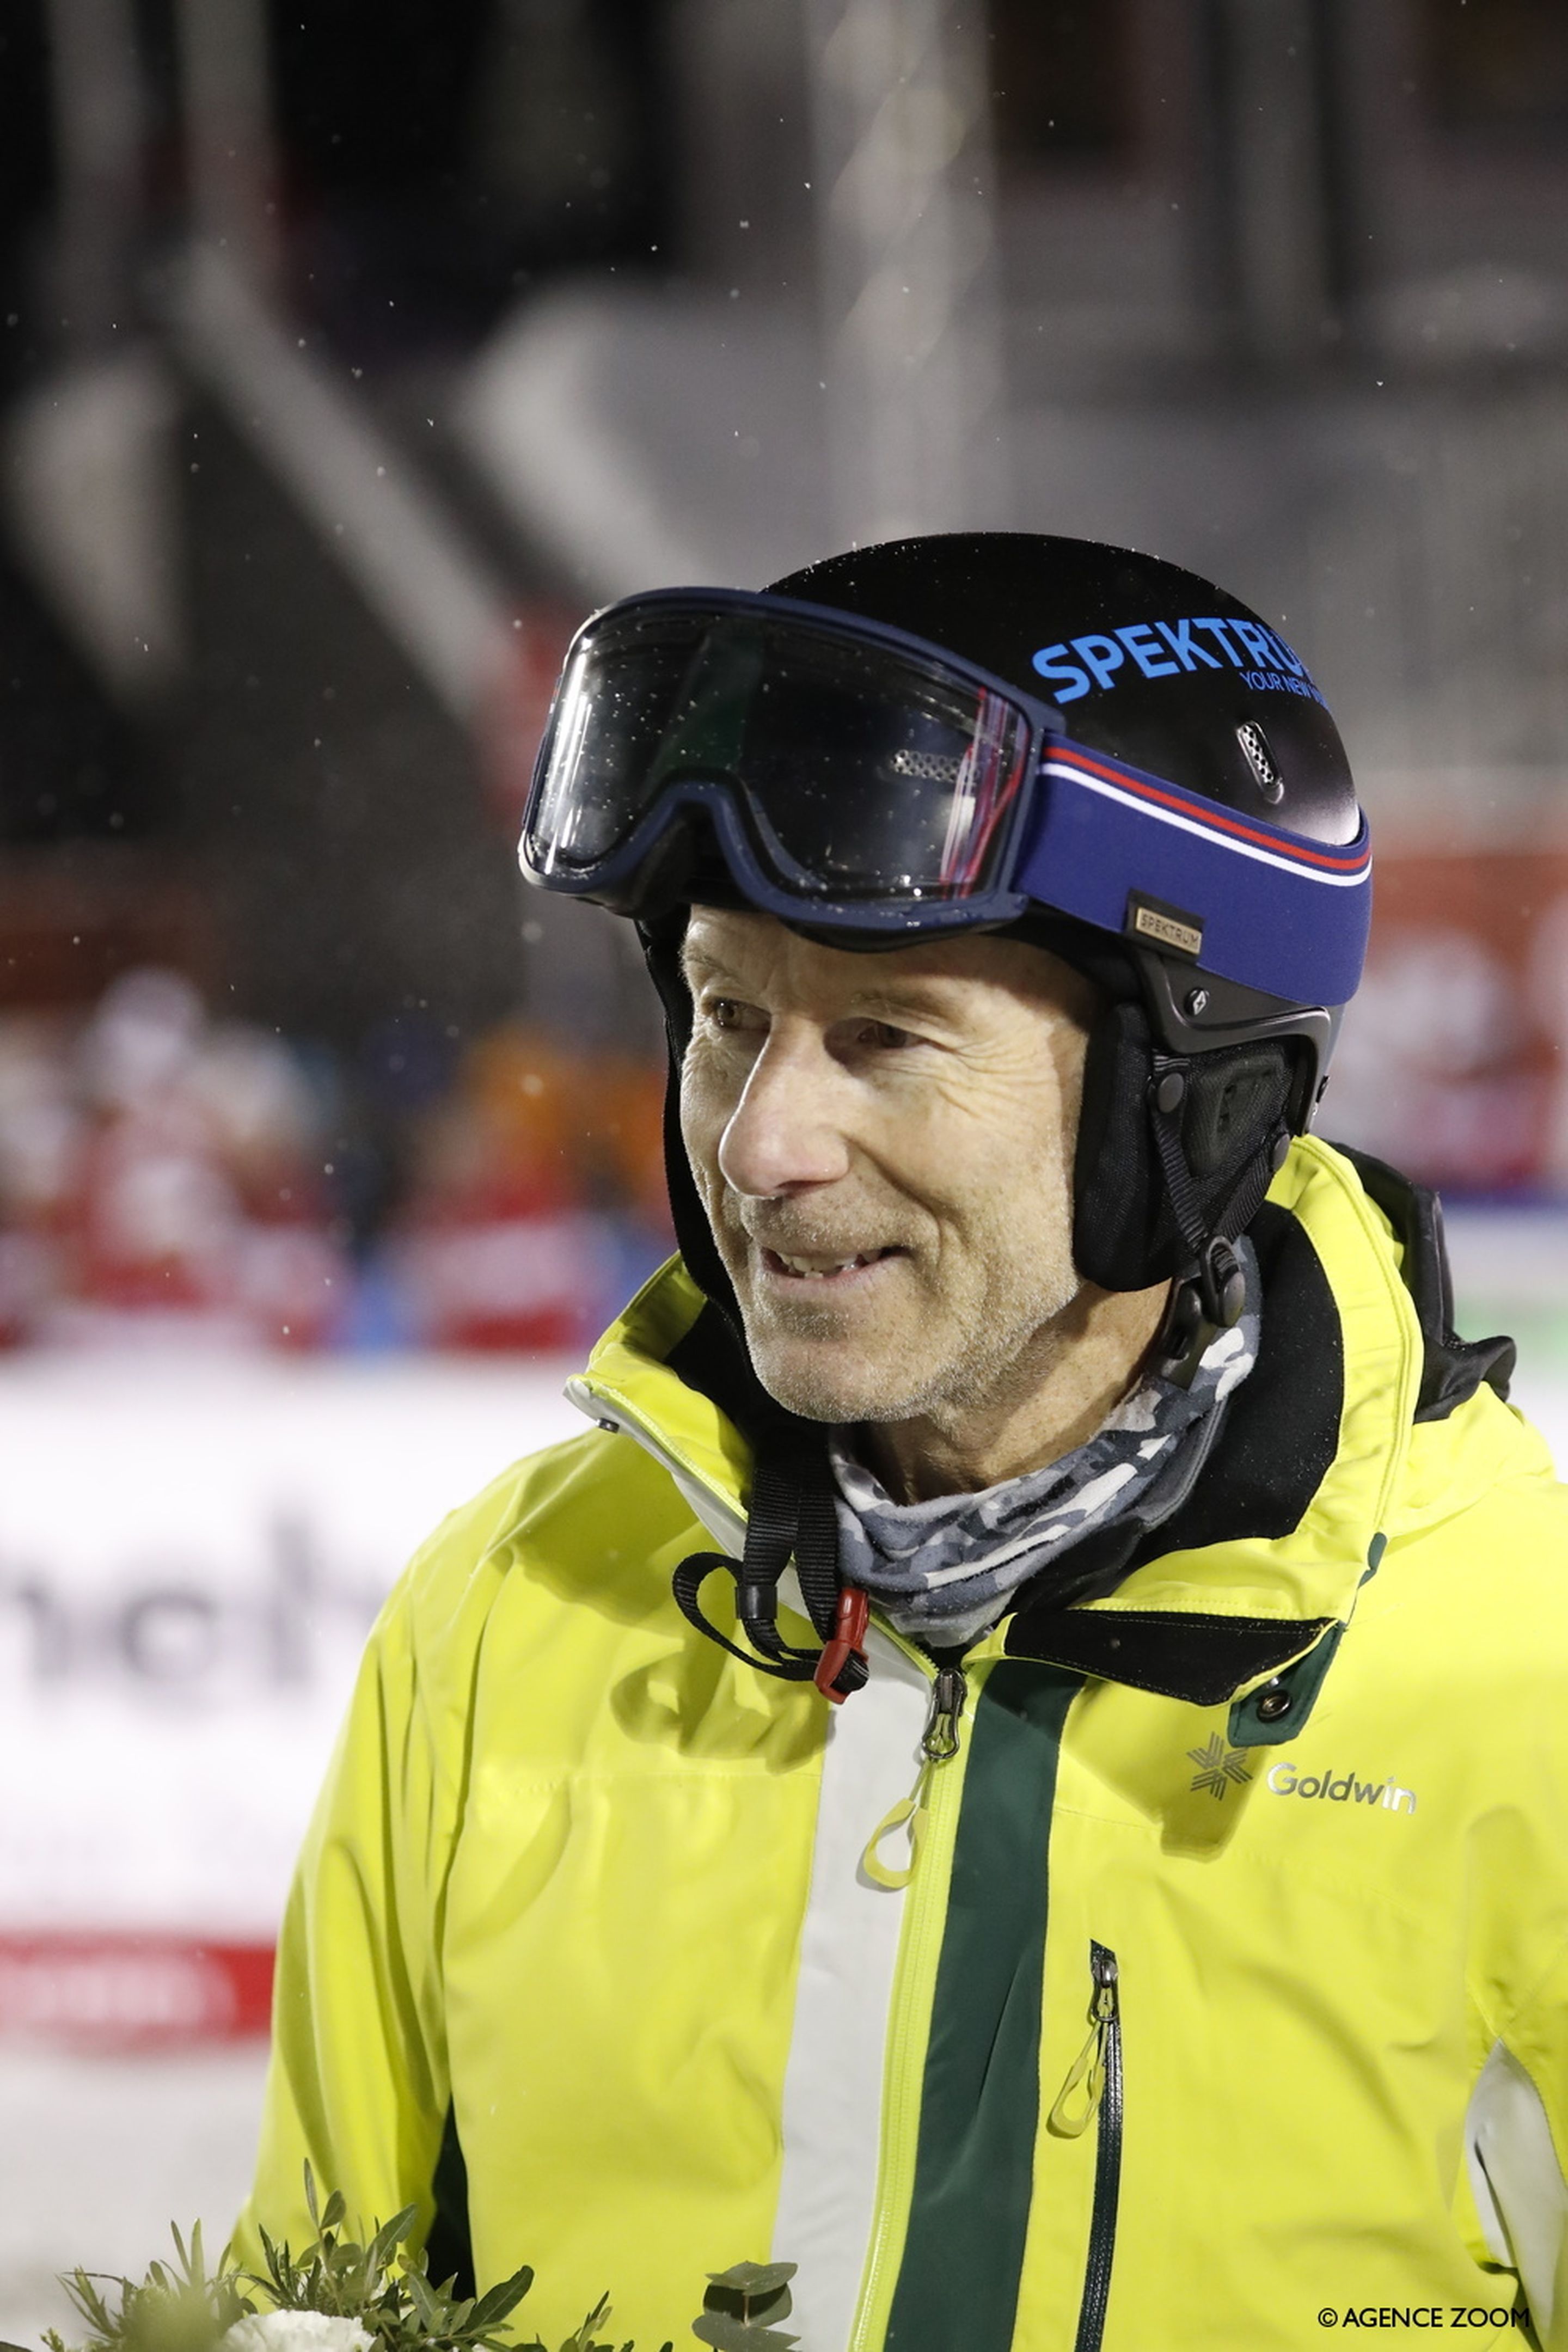 Stenmark is certain Shiffrin is far from finished (Agence Zoom)